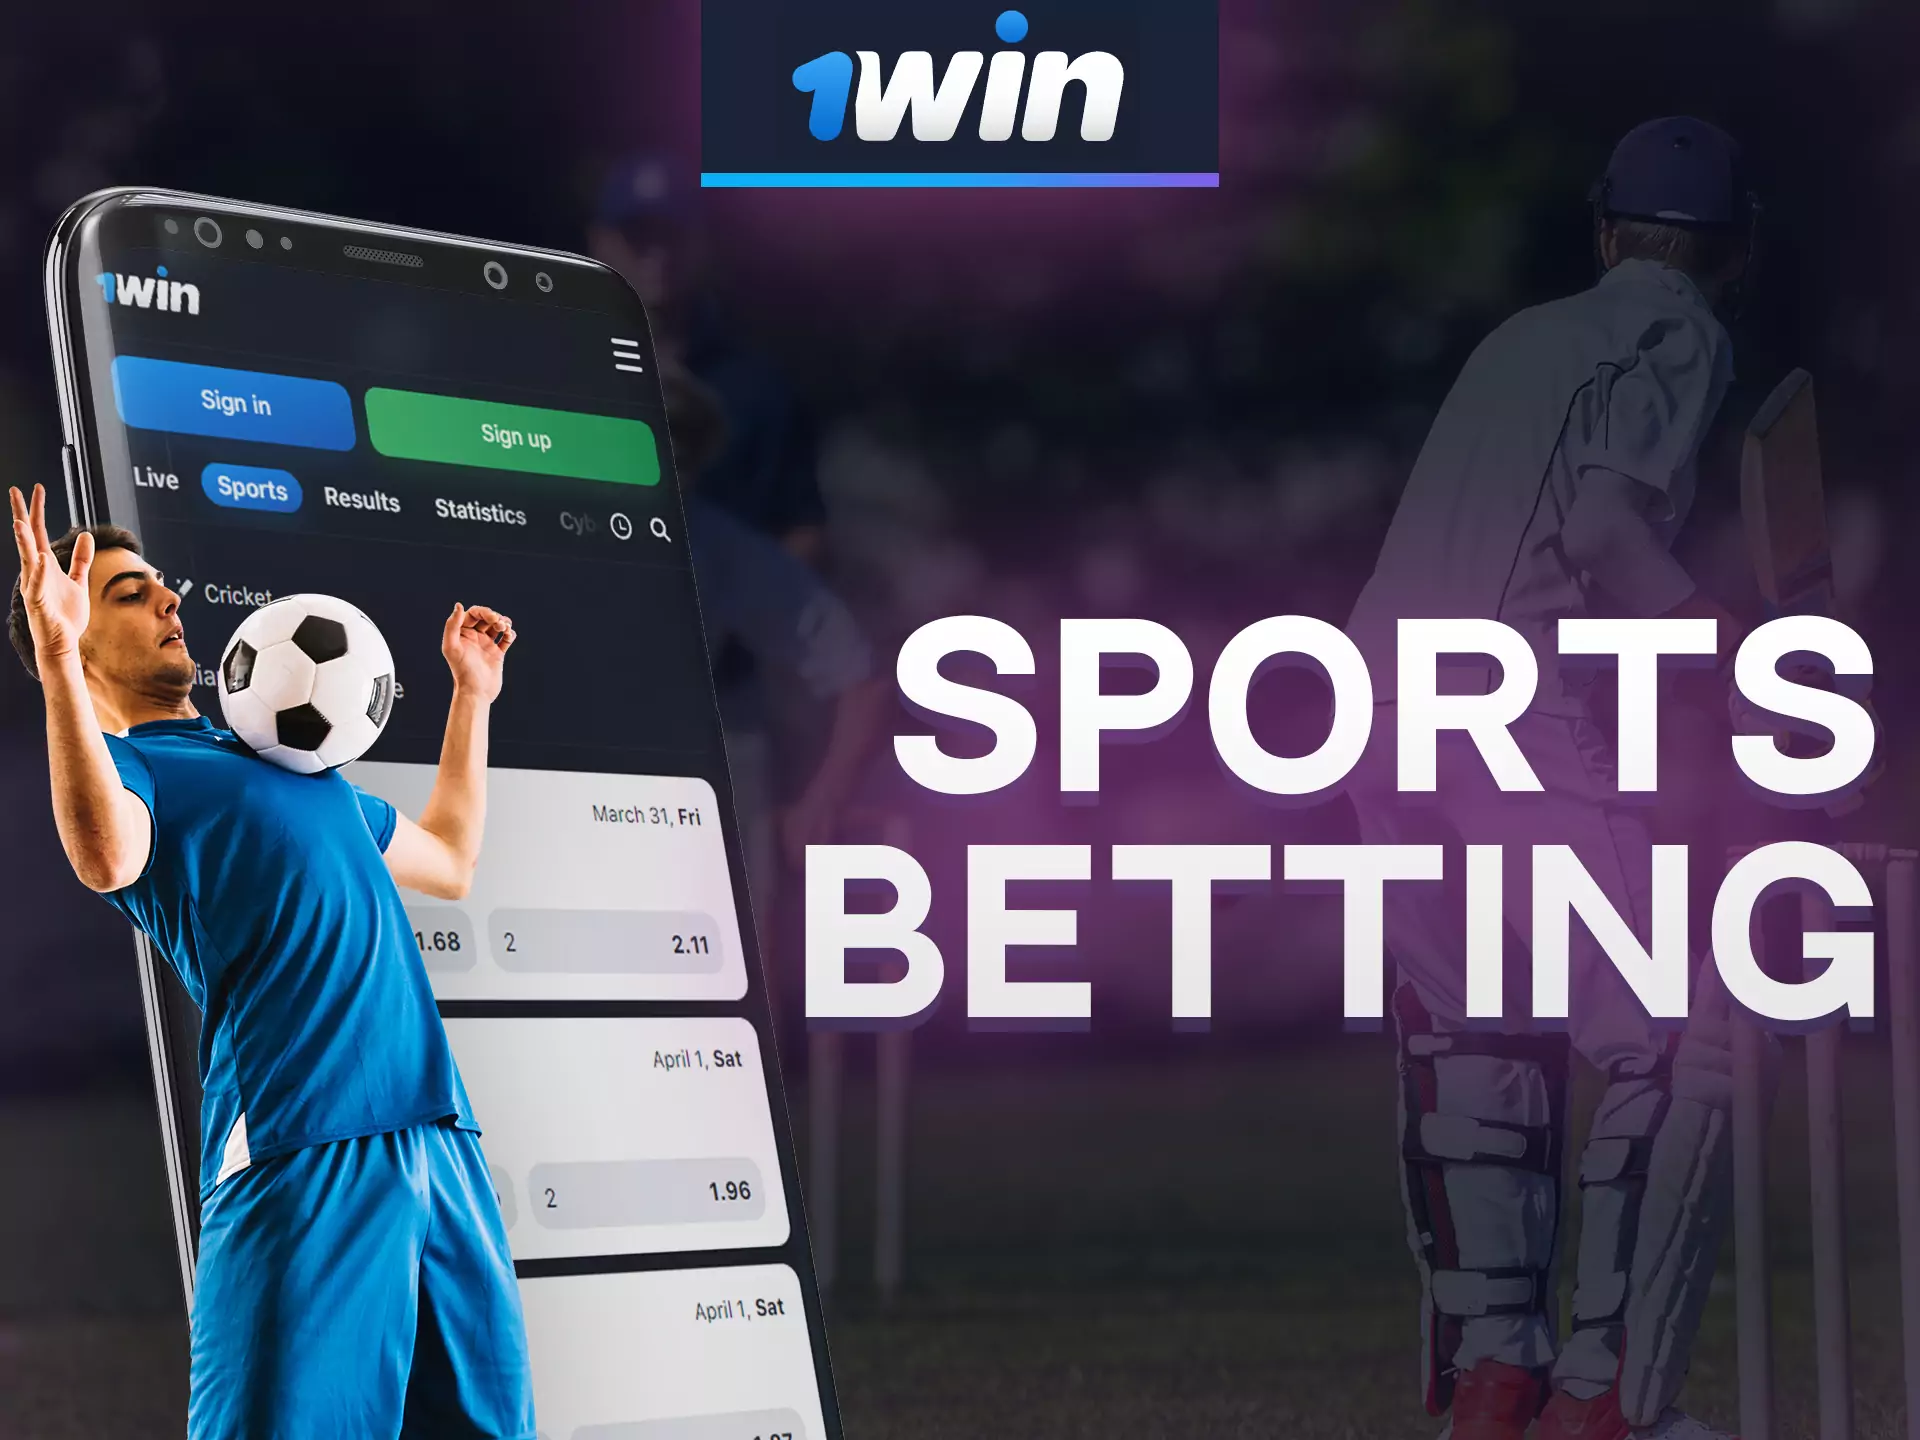 Bet on any avalable sport in 1win app.